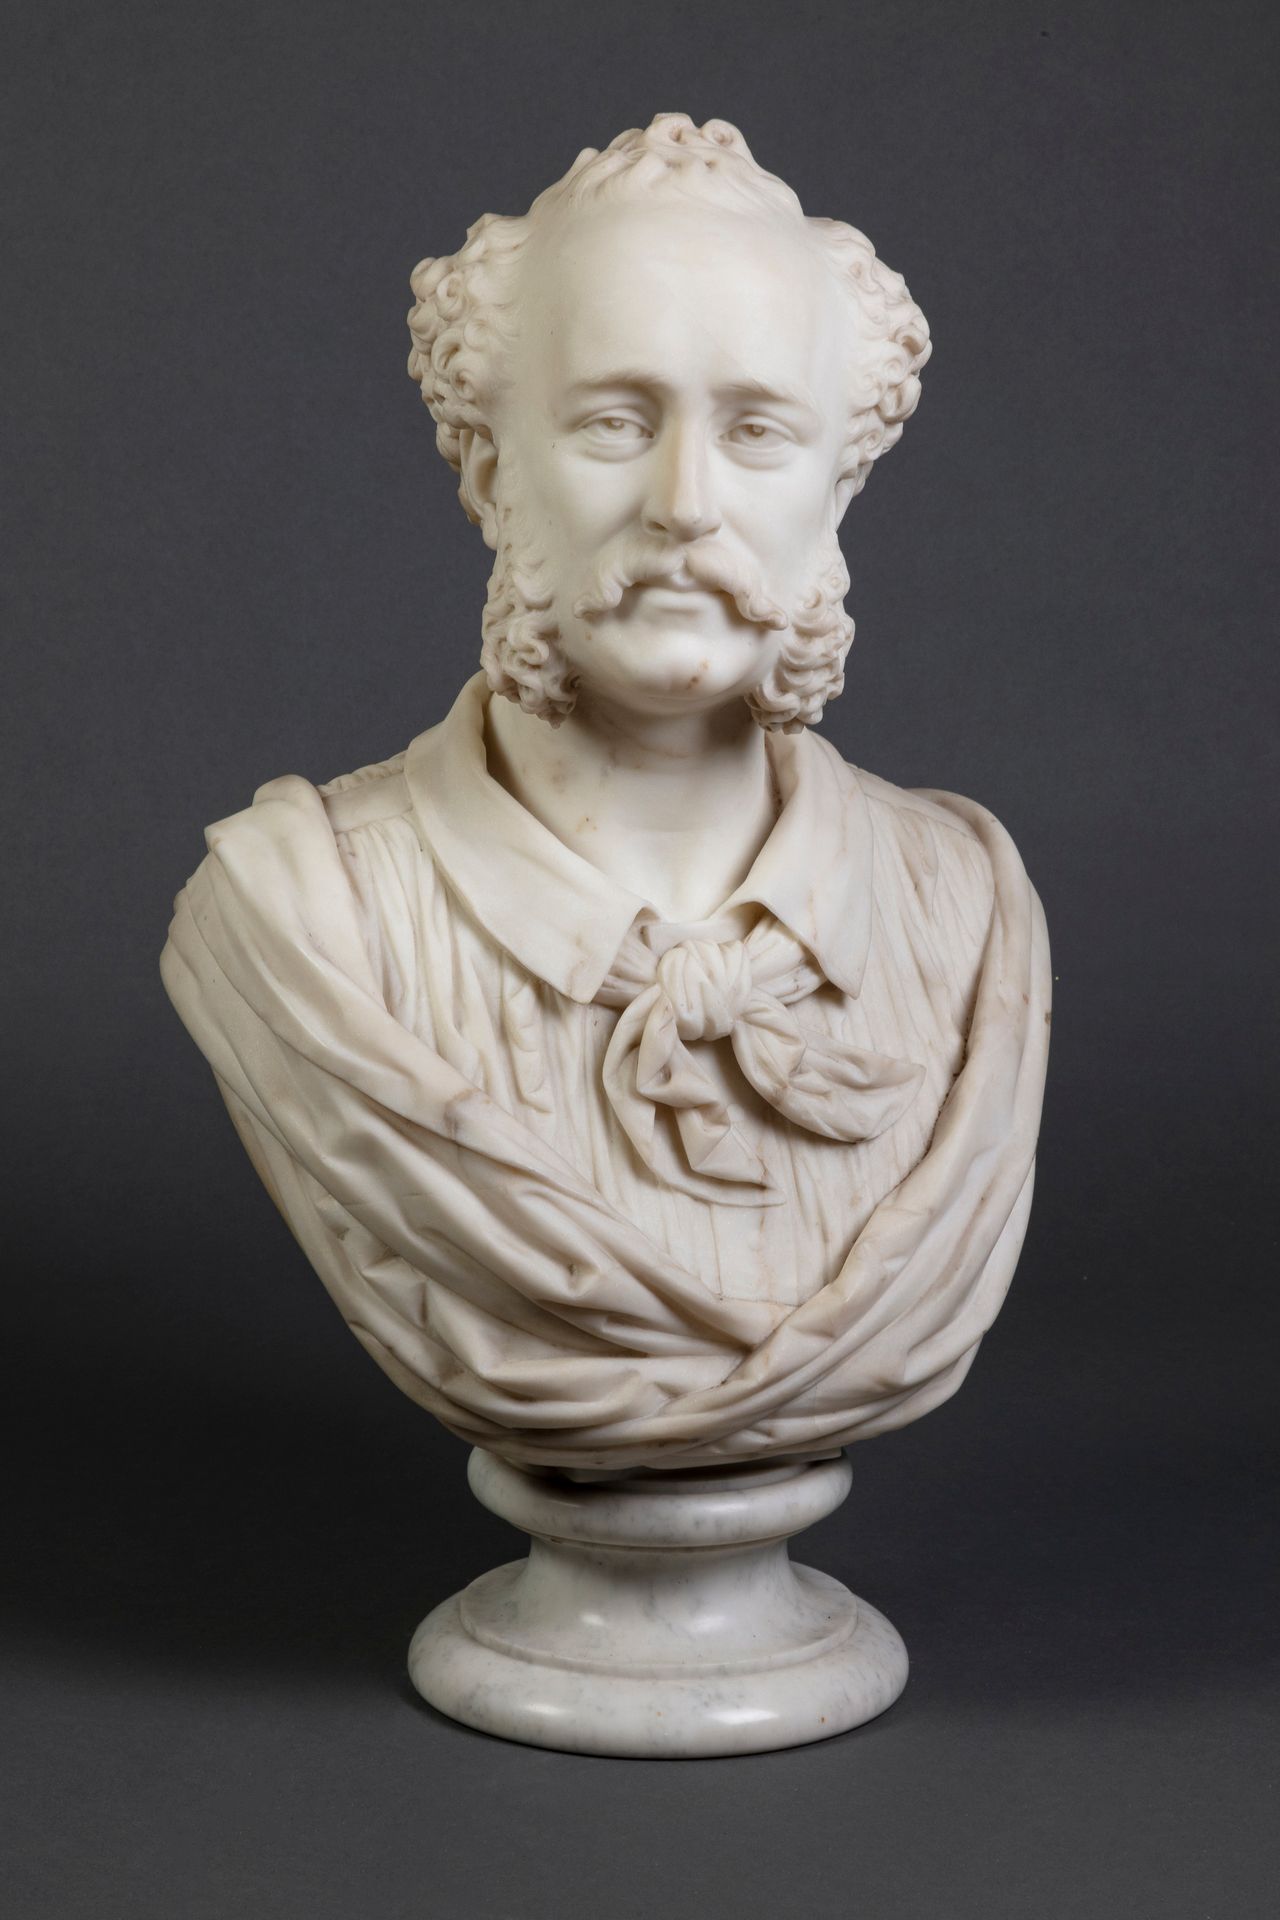 Null Auguste CLÉSINGER (1814-1883)

Bust of a man with a moustache

Marble, sign&hellip;